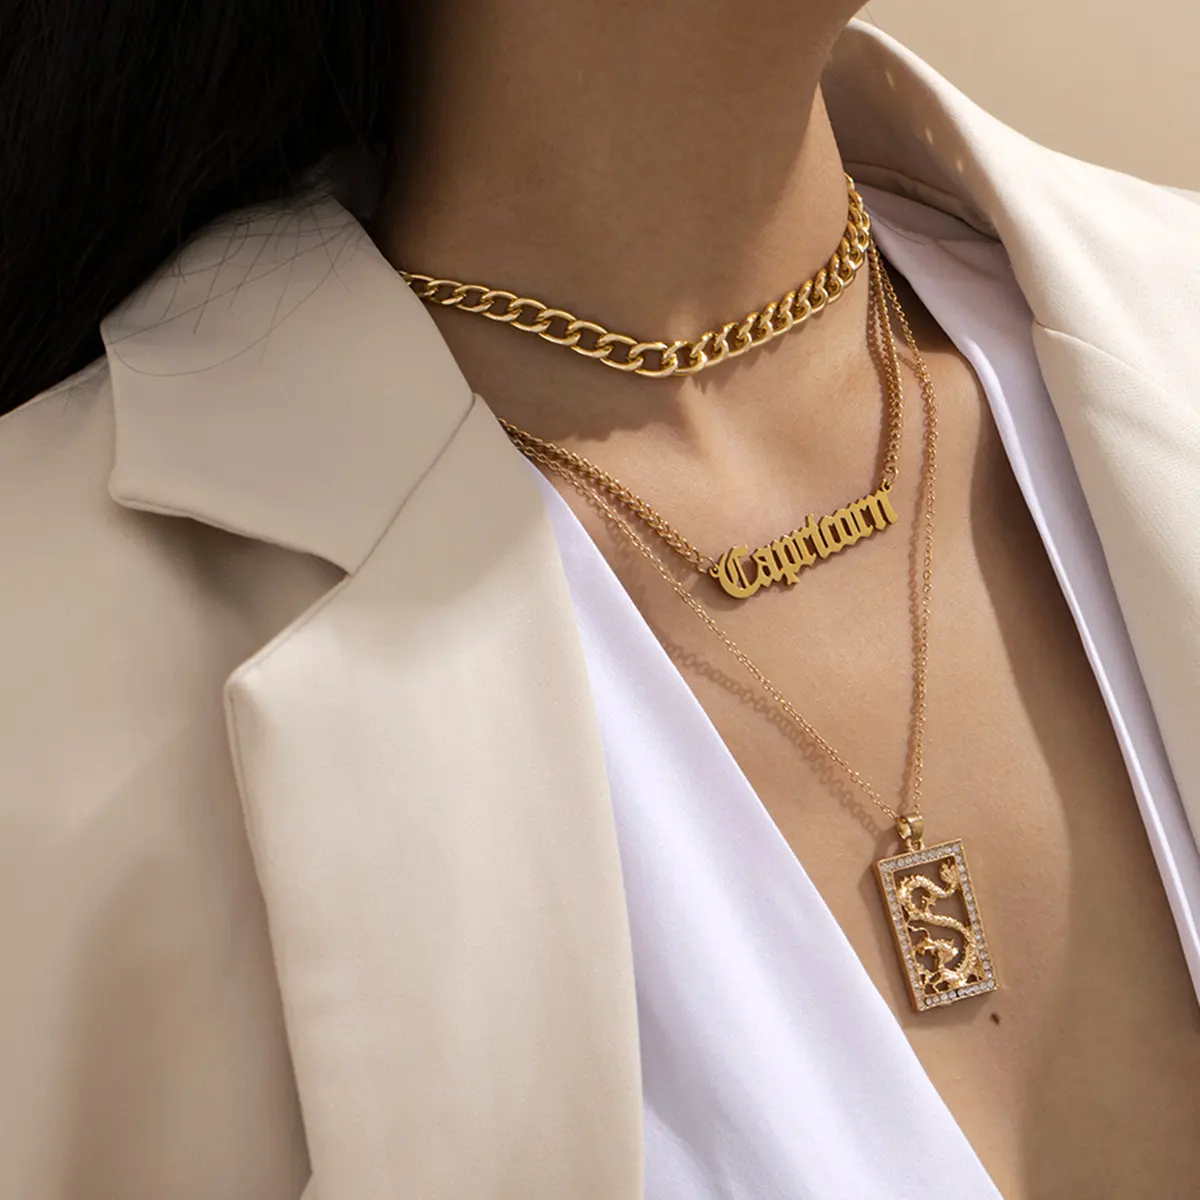 SHIXIN Chinese Zodiac Sign Charm Necklace in Bulk Layered Necklace Zodiac Sign Pendant Necklace for Women Horoscope Star Jewelry